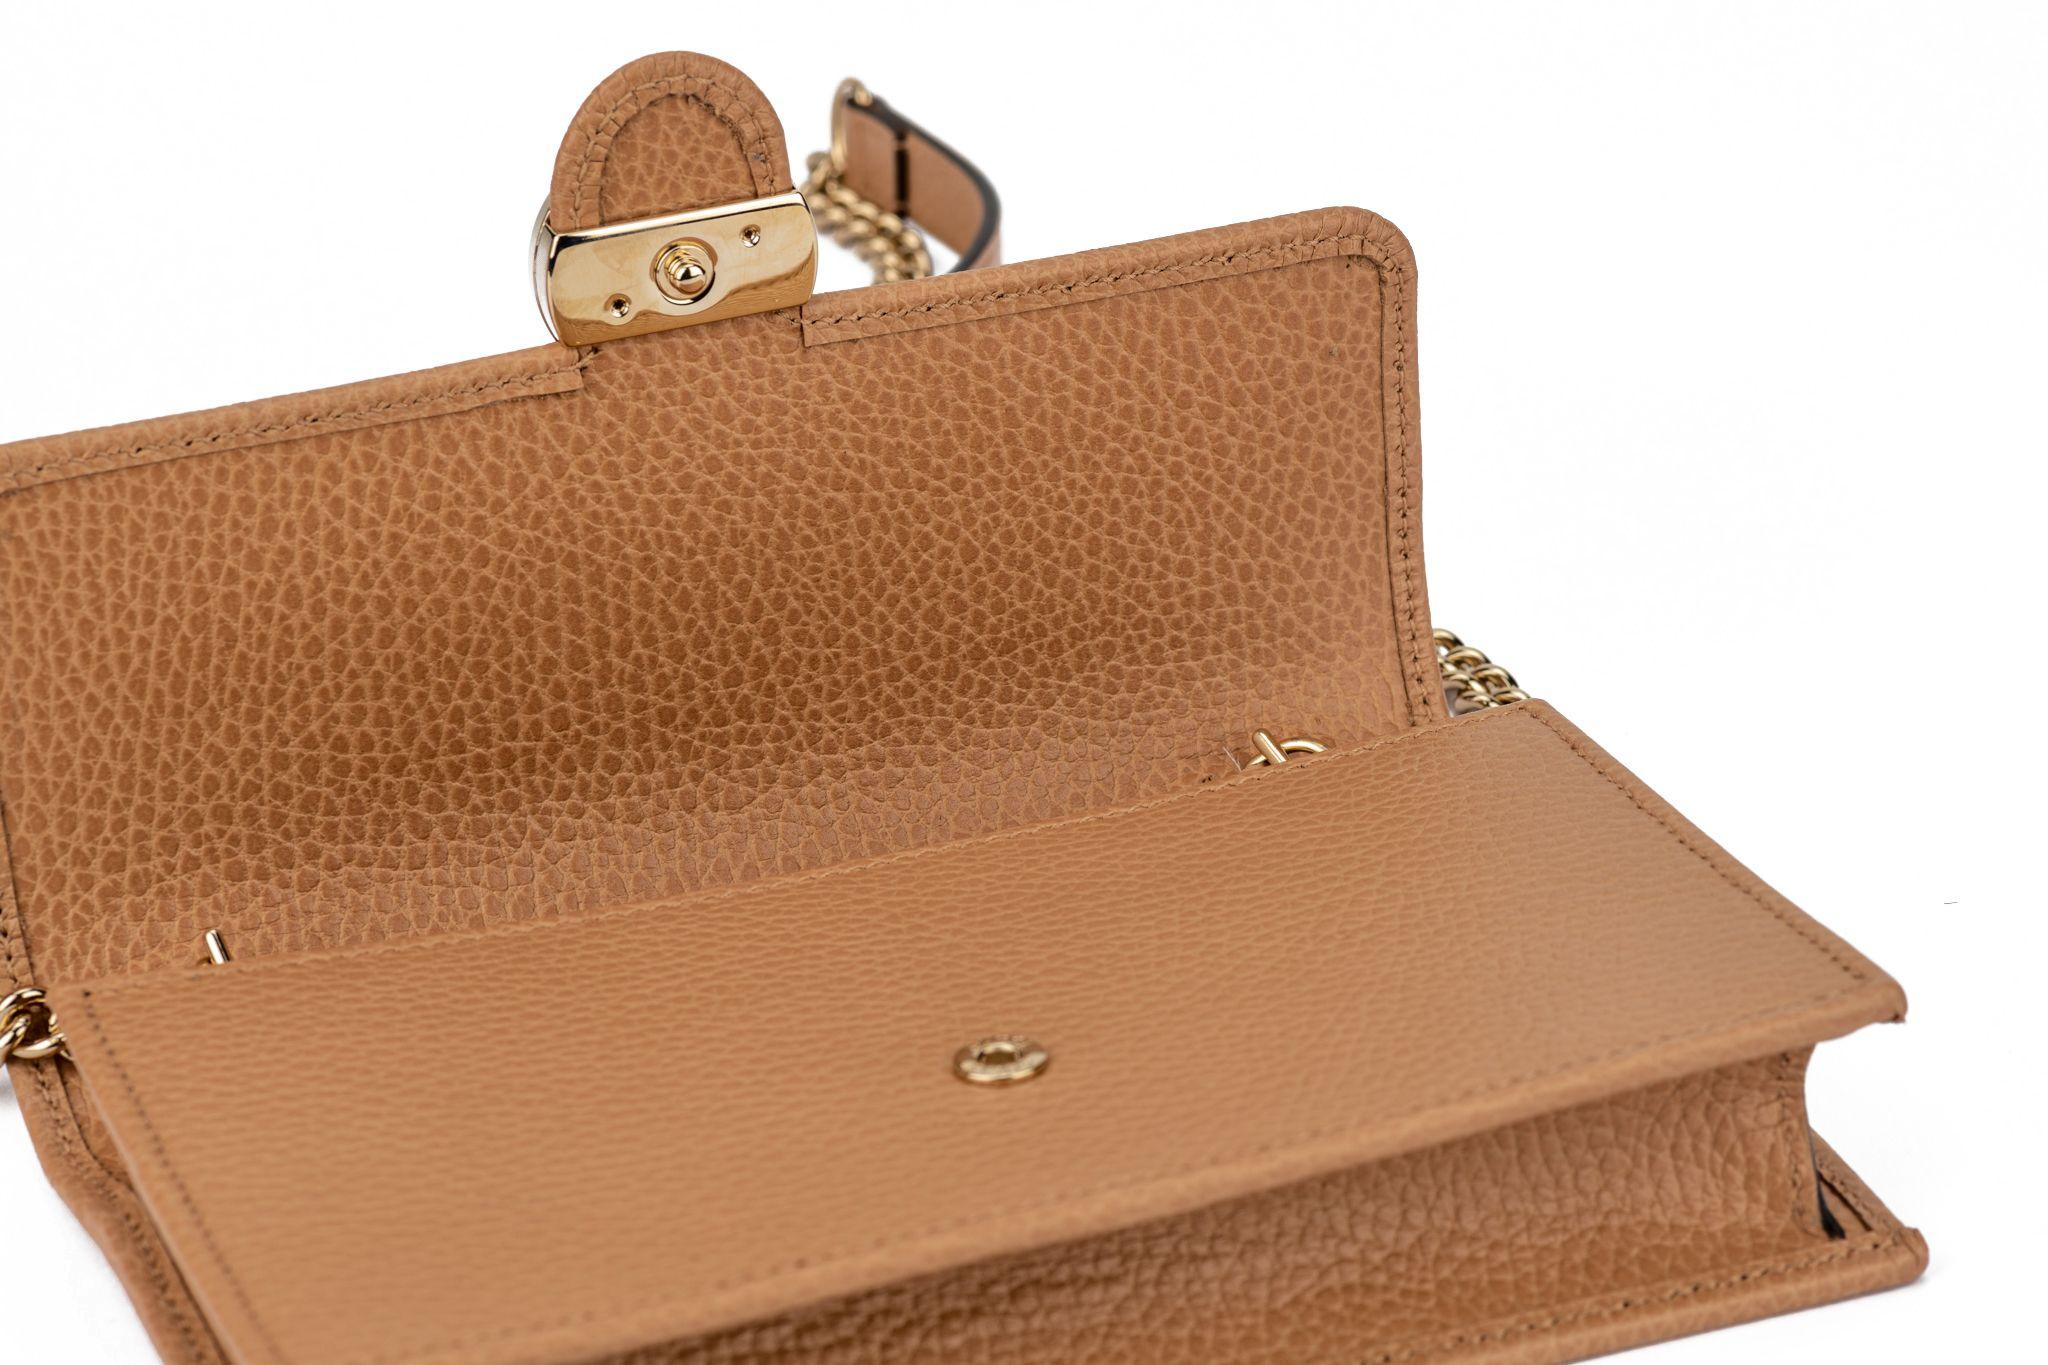 Gucci New Camel Leather Cross Body/Clutch Bag In New Condition For Sale In West Hollywood, CA